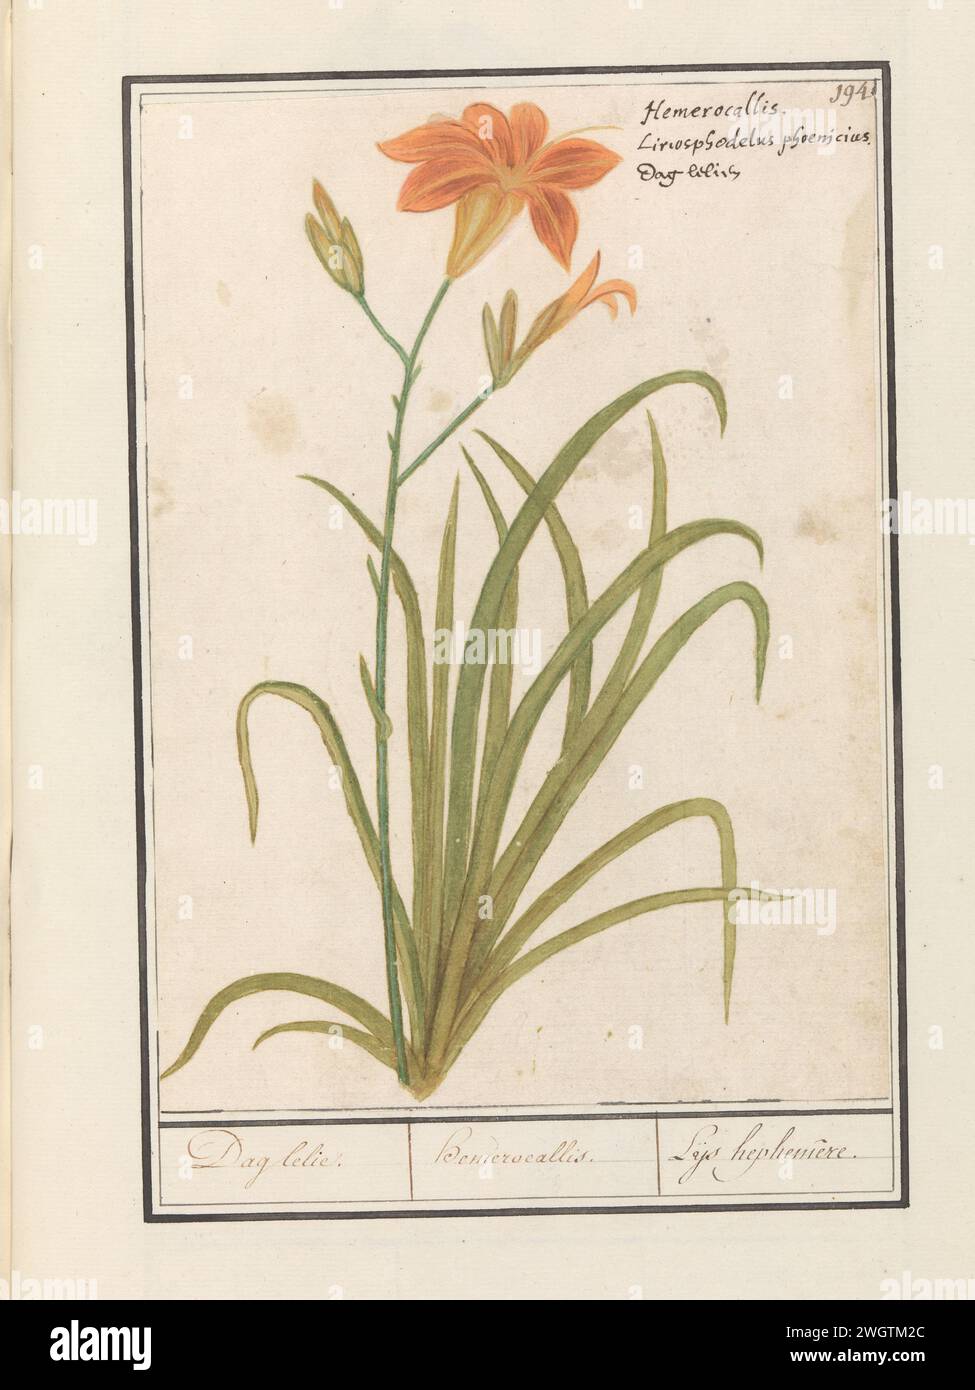 Orange daylily (hemerocallis), Anselmus Boëtius de Boodt, 1596 - 1610 drawing Oranje Daglelie. Numbered at the top right: 194. At the top right of the Latin and Dutch name. Part of the second album with drawings of flowers and plants. Ninth of twelve albums with drawings of animals, birds and plants known around 1600, made commissioned by Emperor Rudolf II. With explanation in Dutch, Latin and French. draughtsman: Praagdraughtsman: Delft paper. watercolor (paint). deck paint. chalk. ink brush / pen flowers: lily Stock Photo